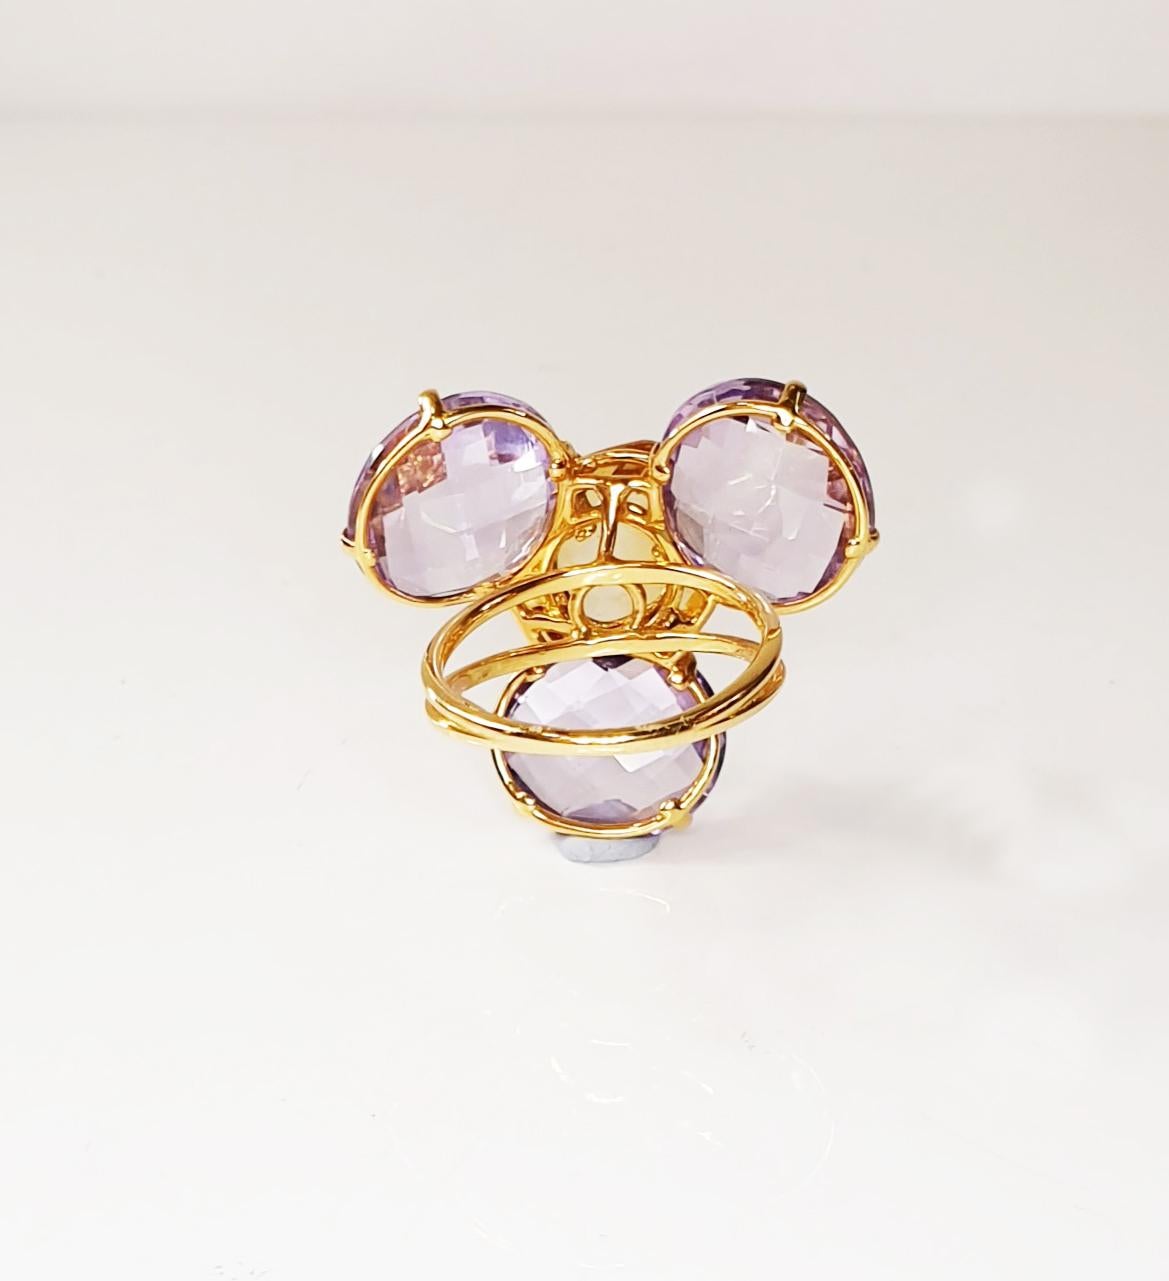 Multiphaceted Flower Ring with Central Citrine and Three Amethysts For Sale 1